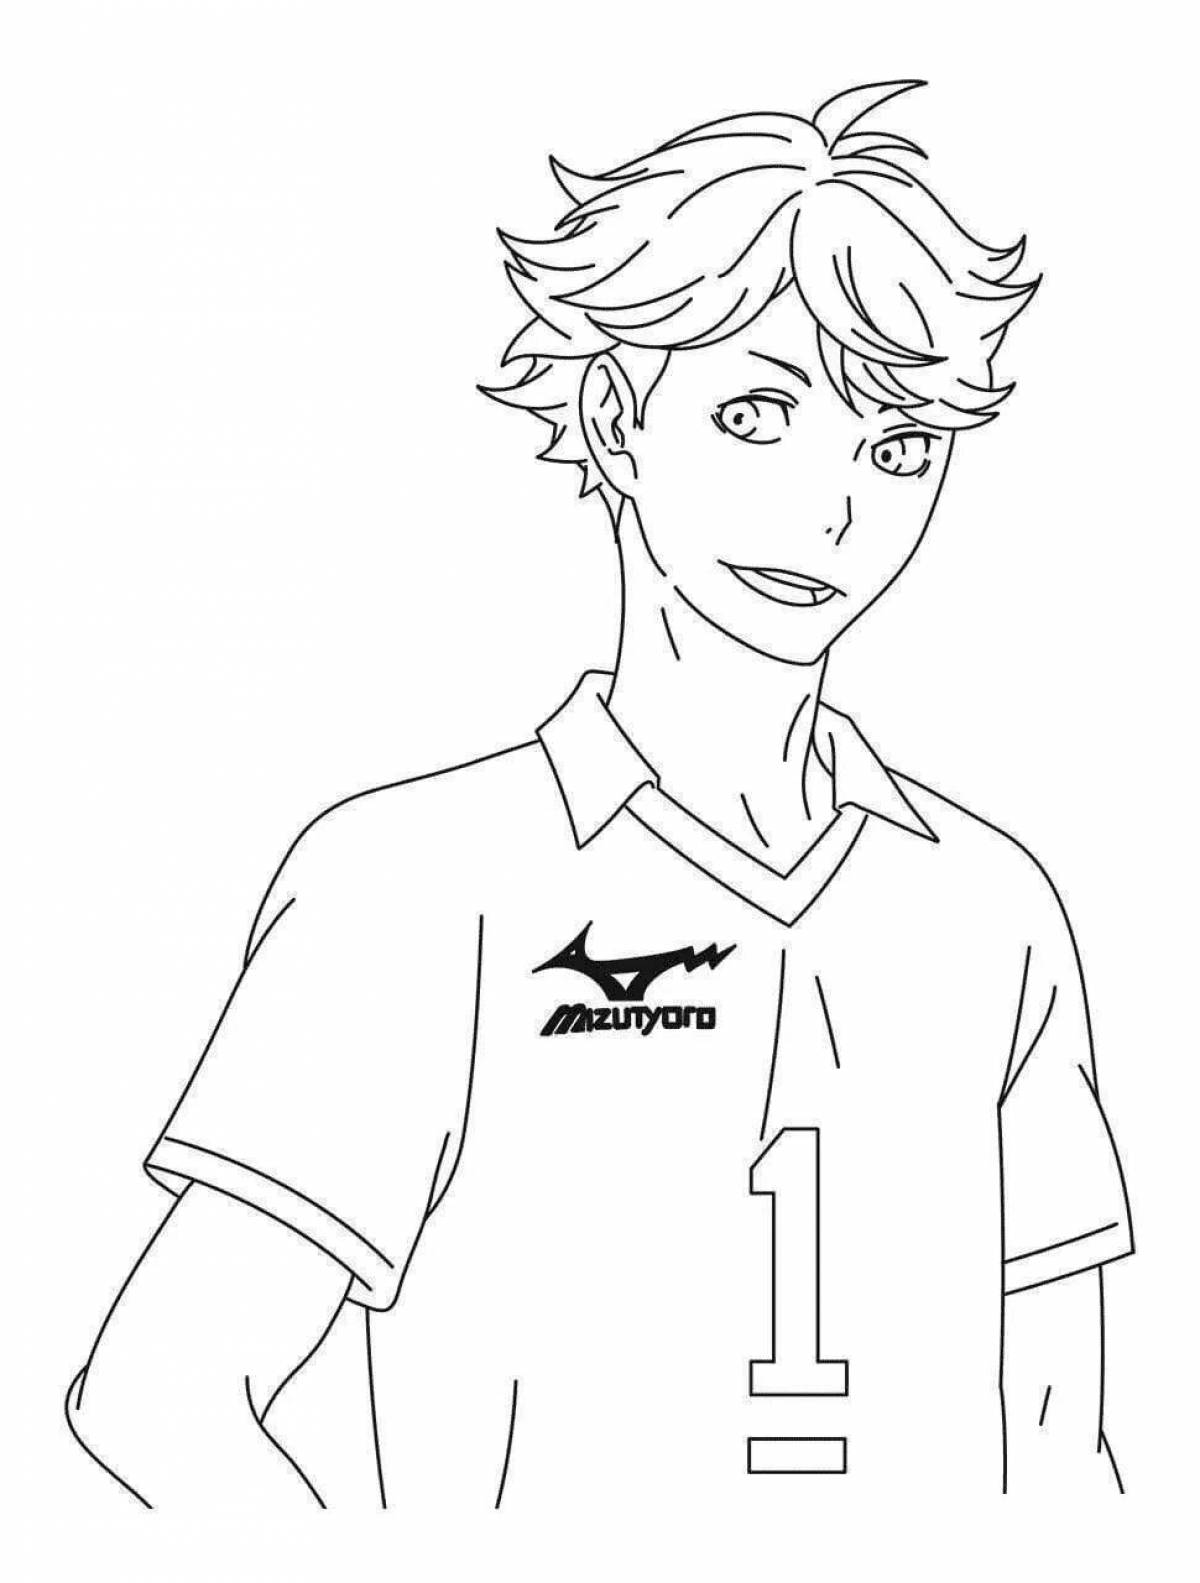 Hinata witty volleyball coloring book